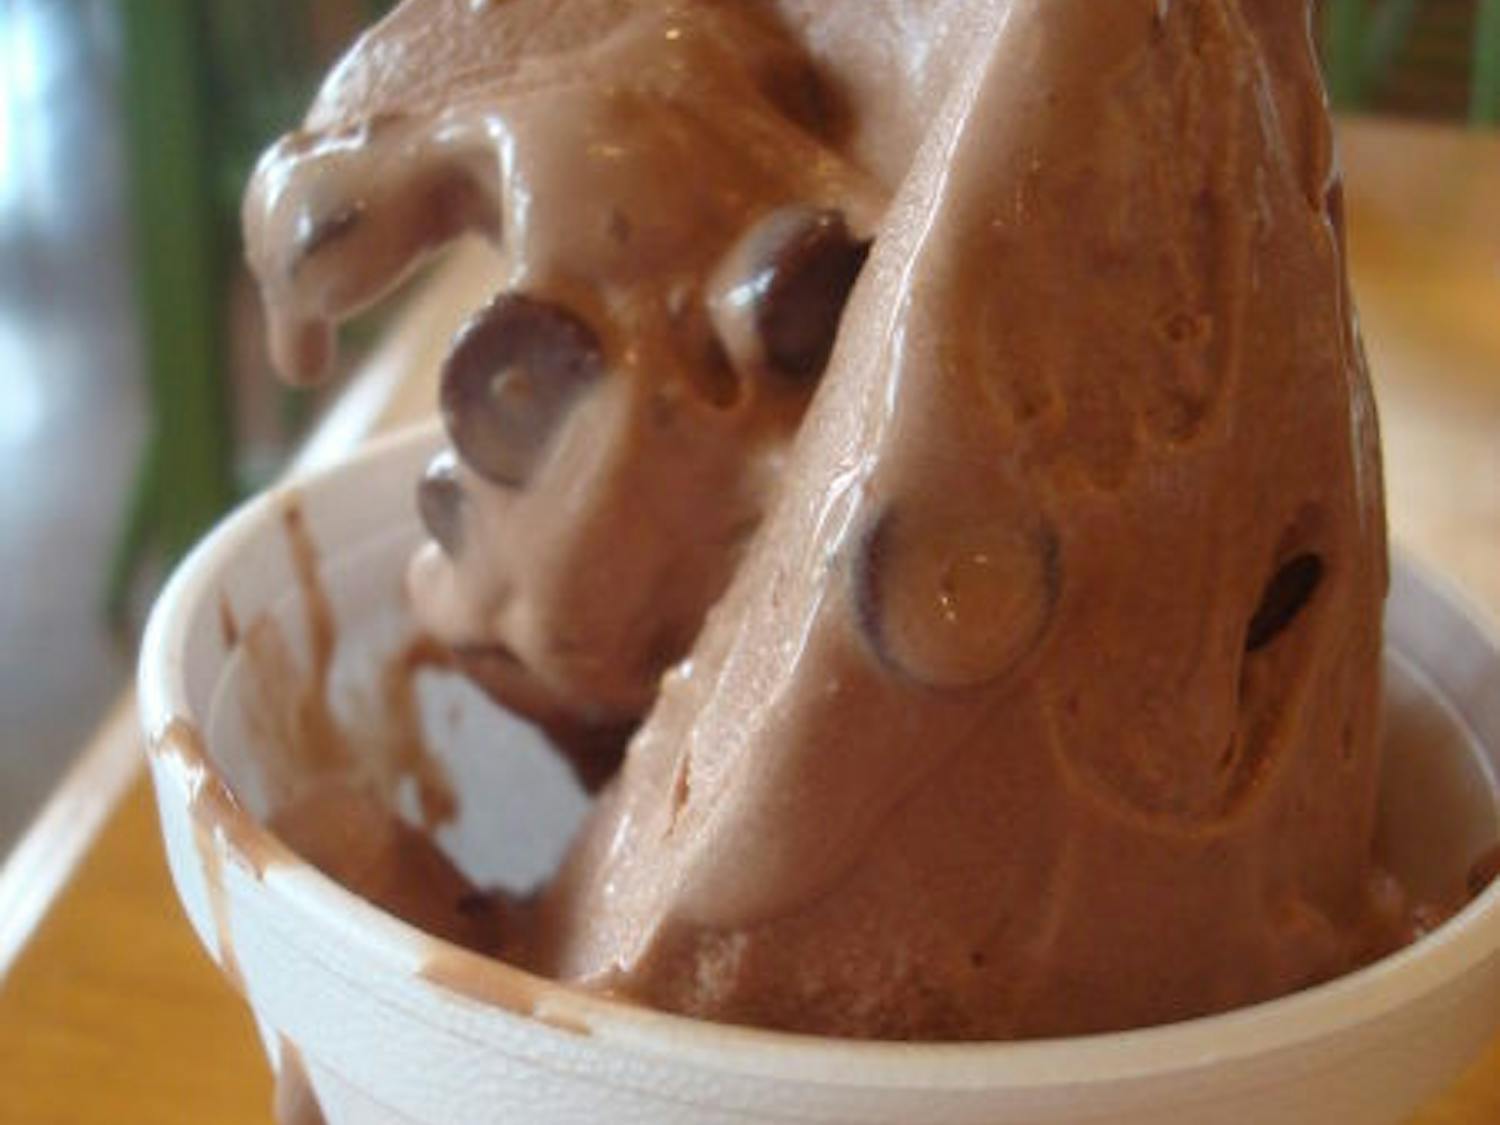 Chocoholic custard from SweetBerries, a local restaurant participating in Gainesville Restaurant Week